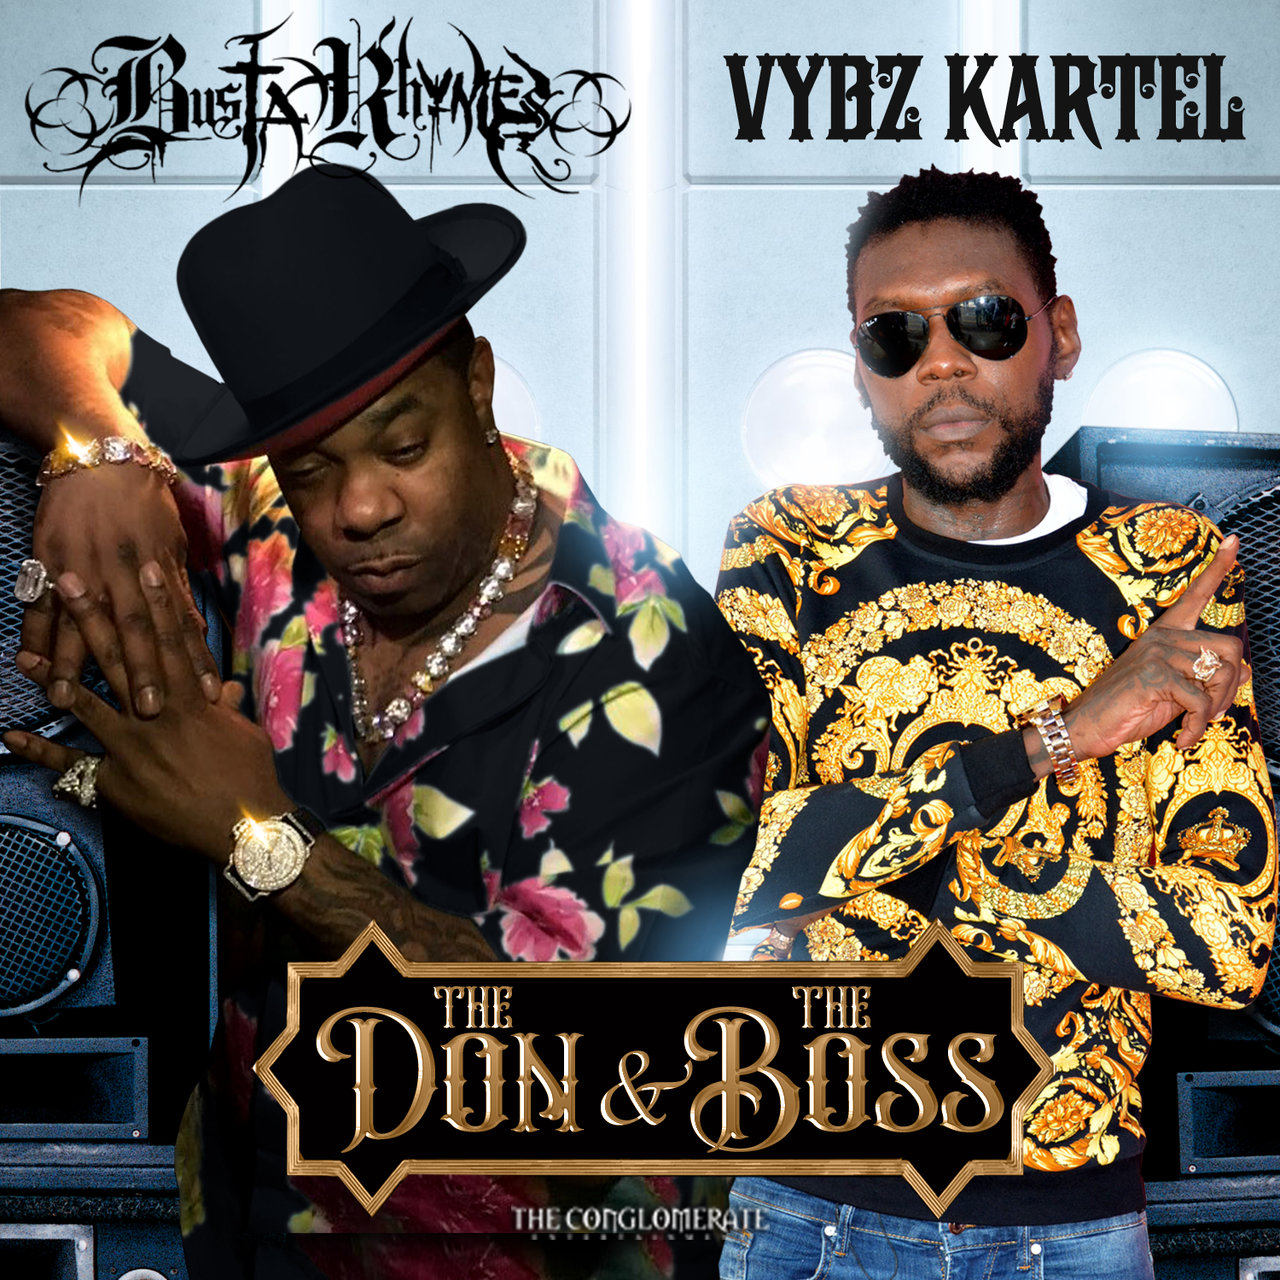 Busta Rhymes - The Don and The Boss (ft. Vybz Kartel) (Cover)